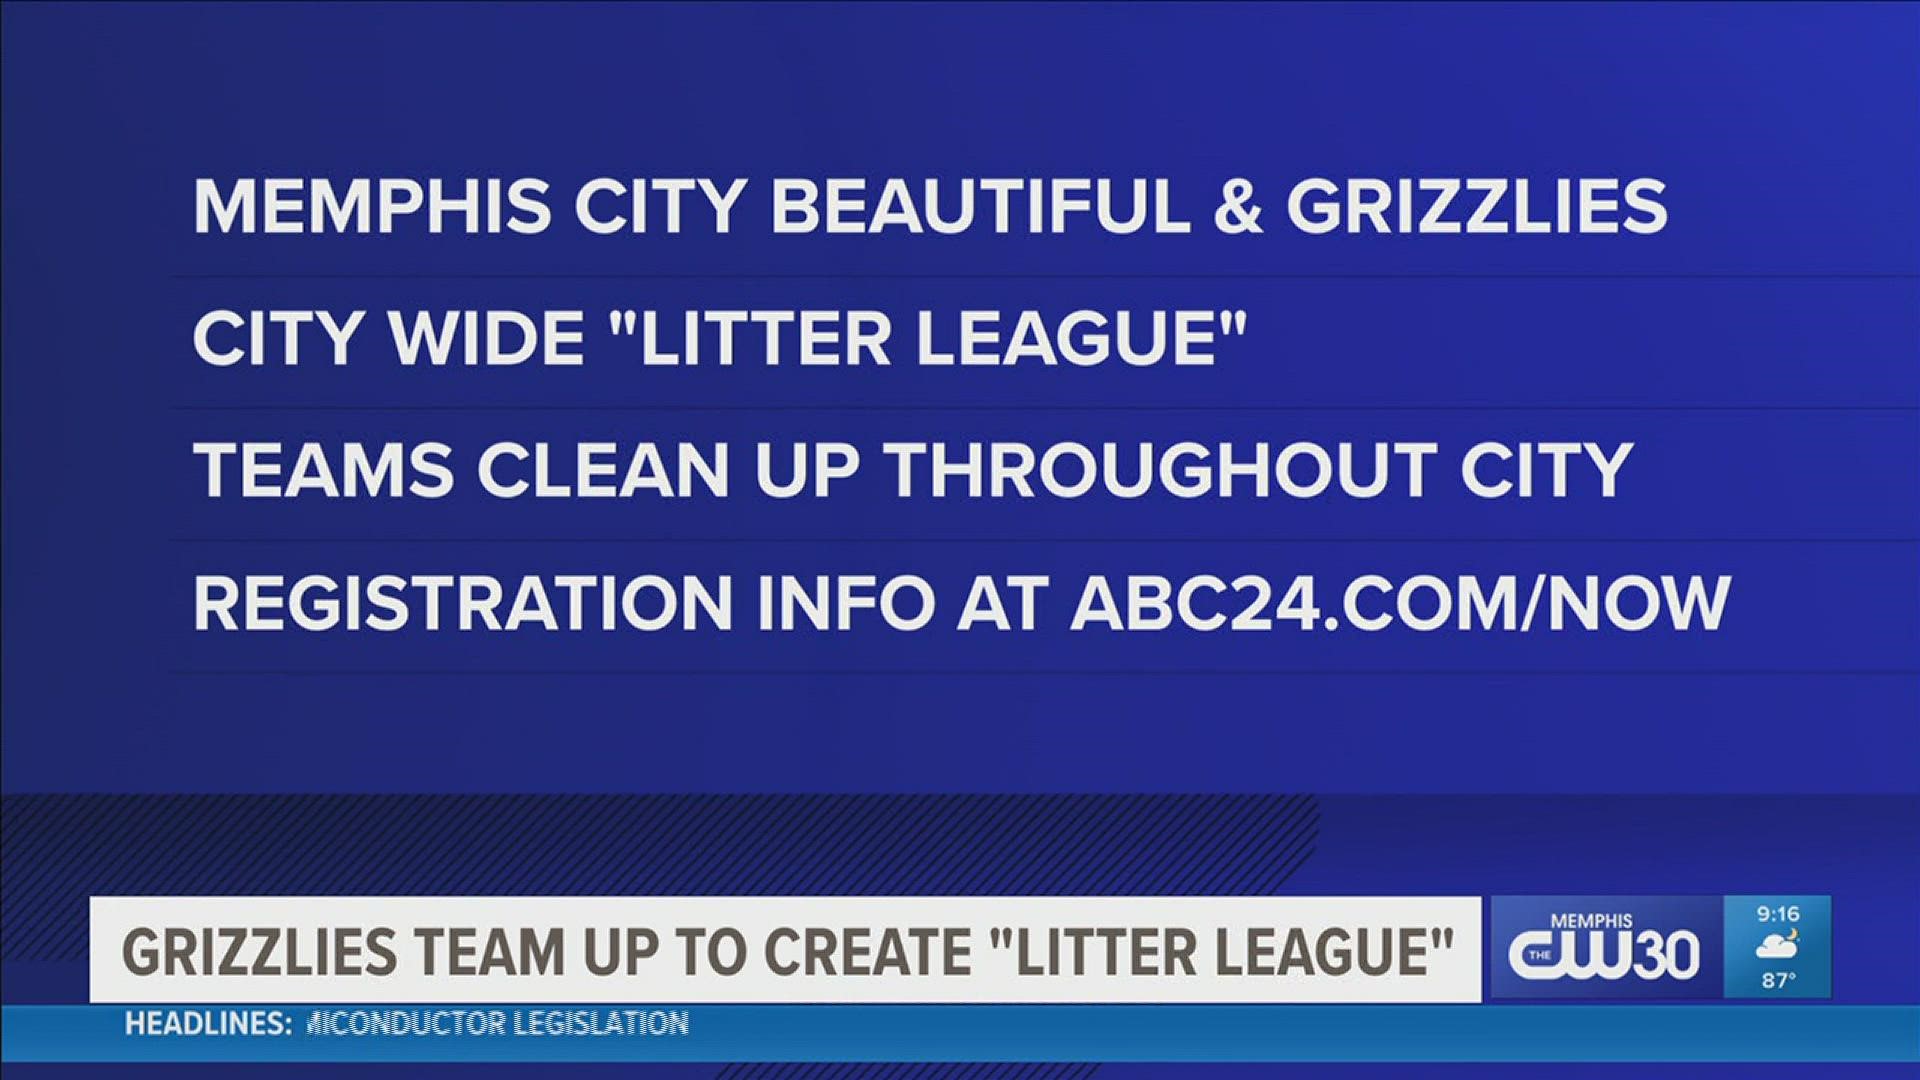 Memphis City Beautiful is teaming up with the Memphis Grizzlies for a city-wide ‘Litter League' in an effort to clean up neighborhoods across the area.